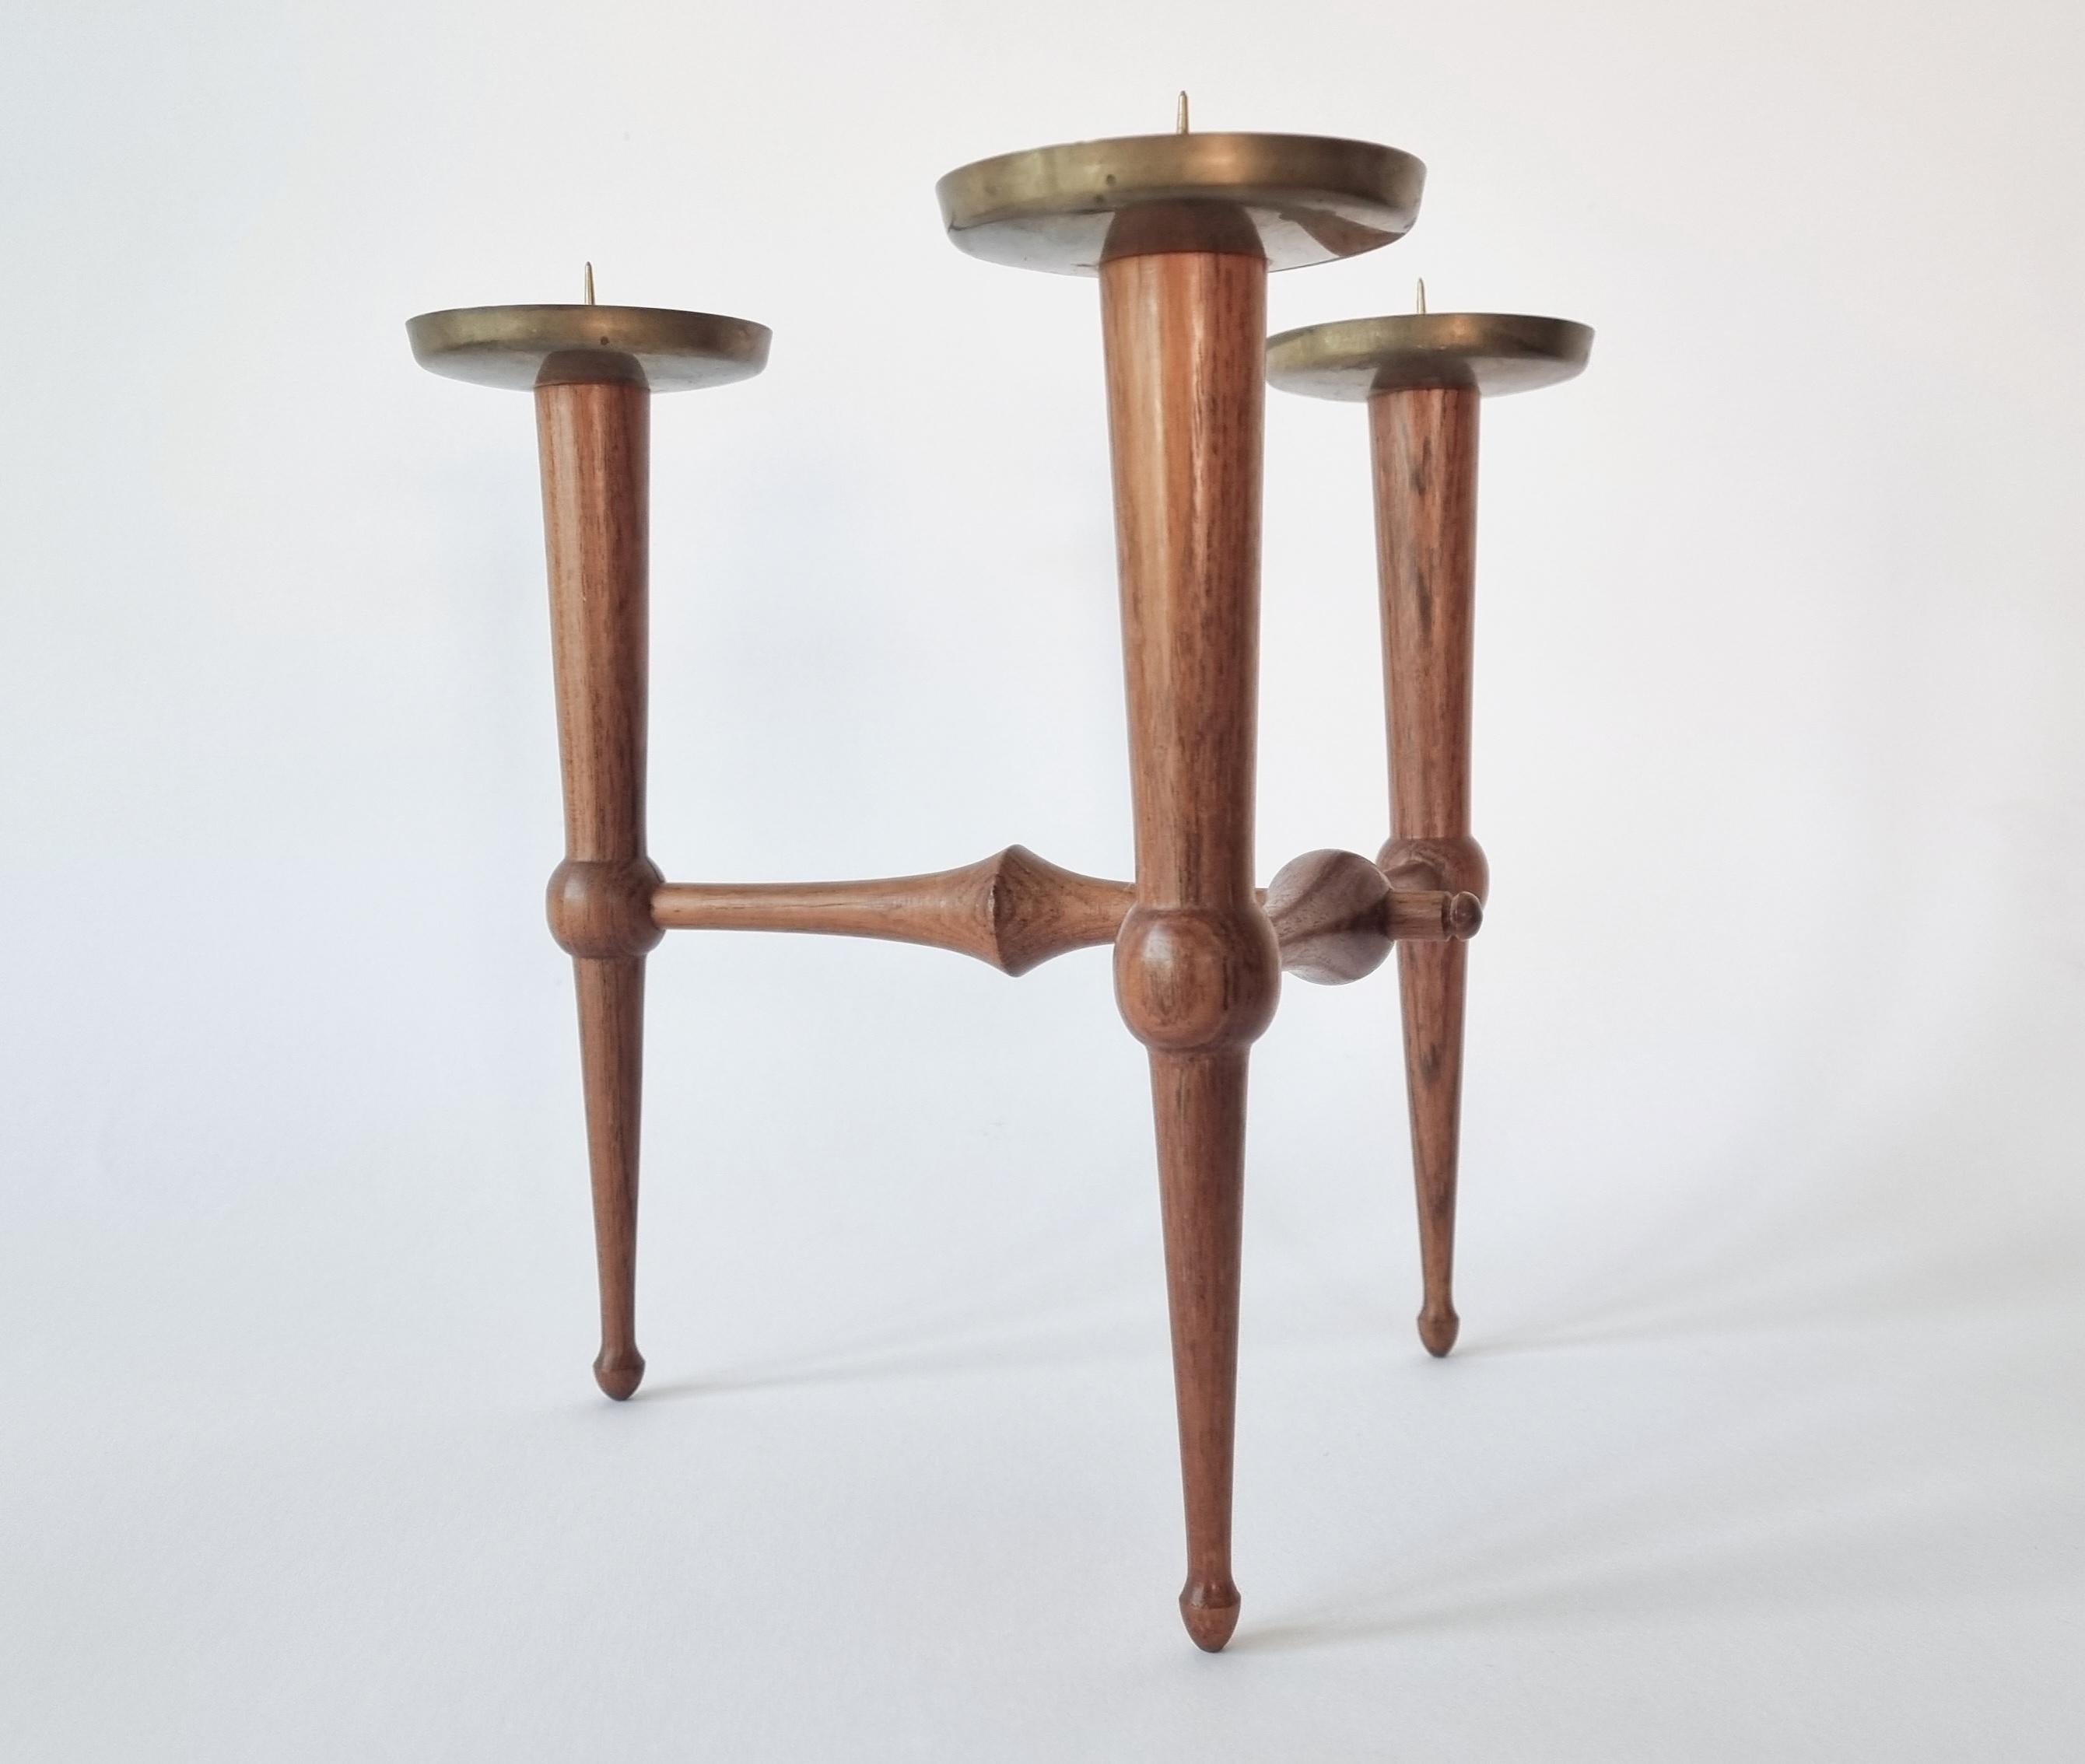 Midcentury Teak and Brass Rare Table Candle Holder / Stick, Denmark, 1960s For Sale 12